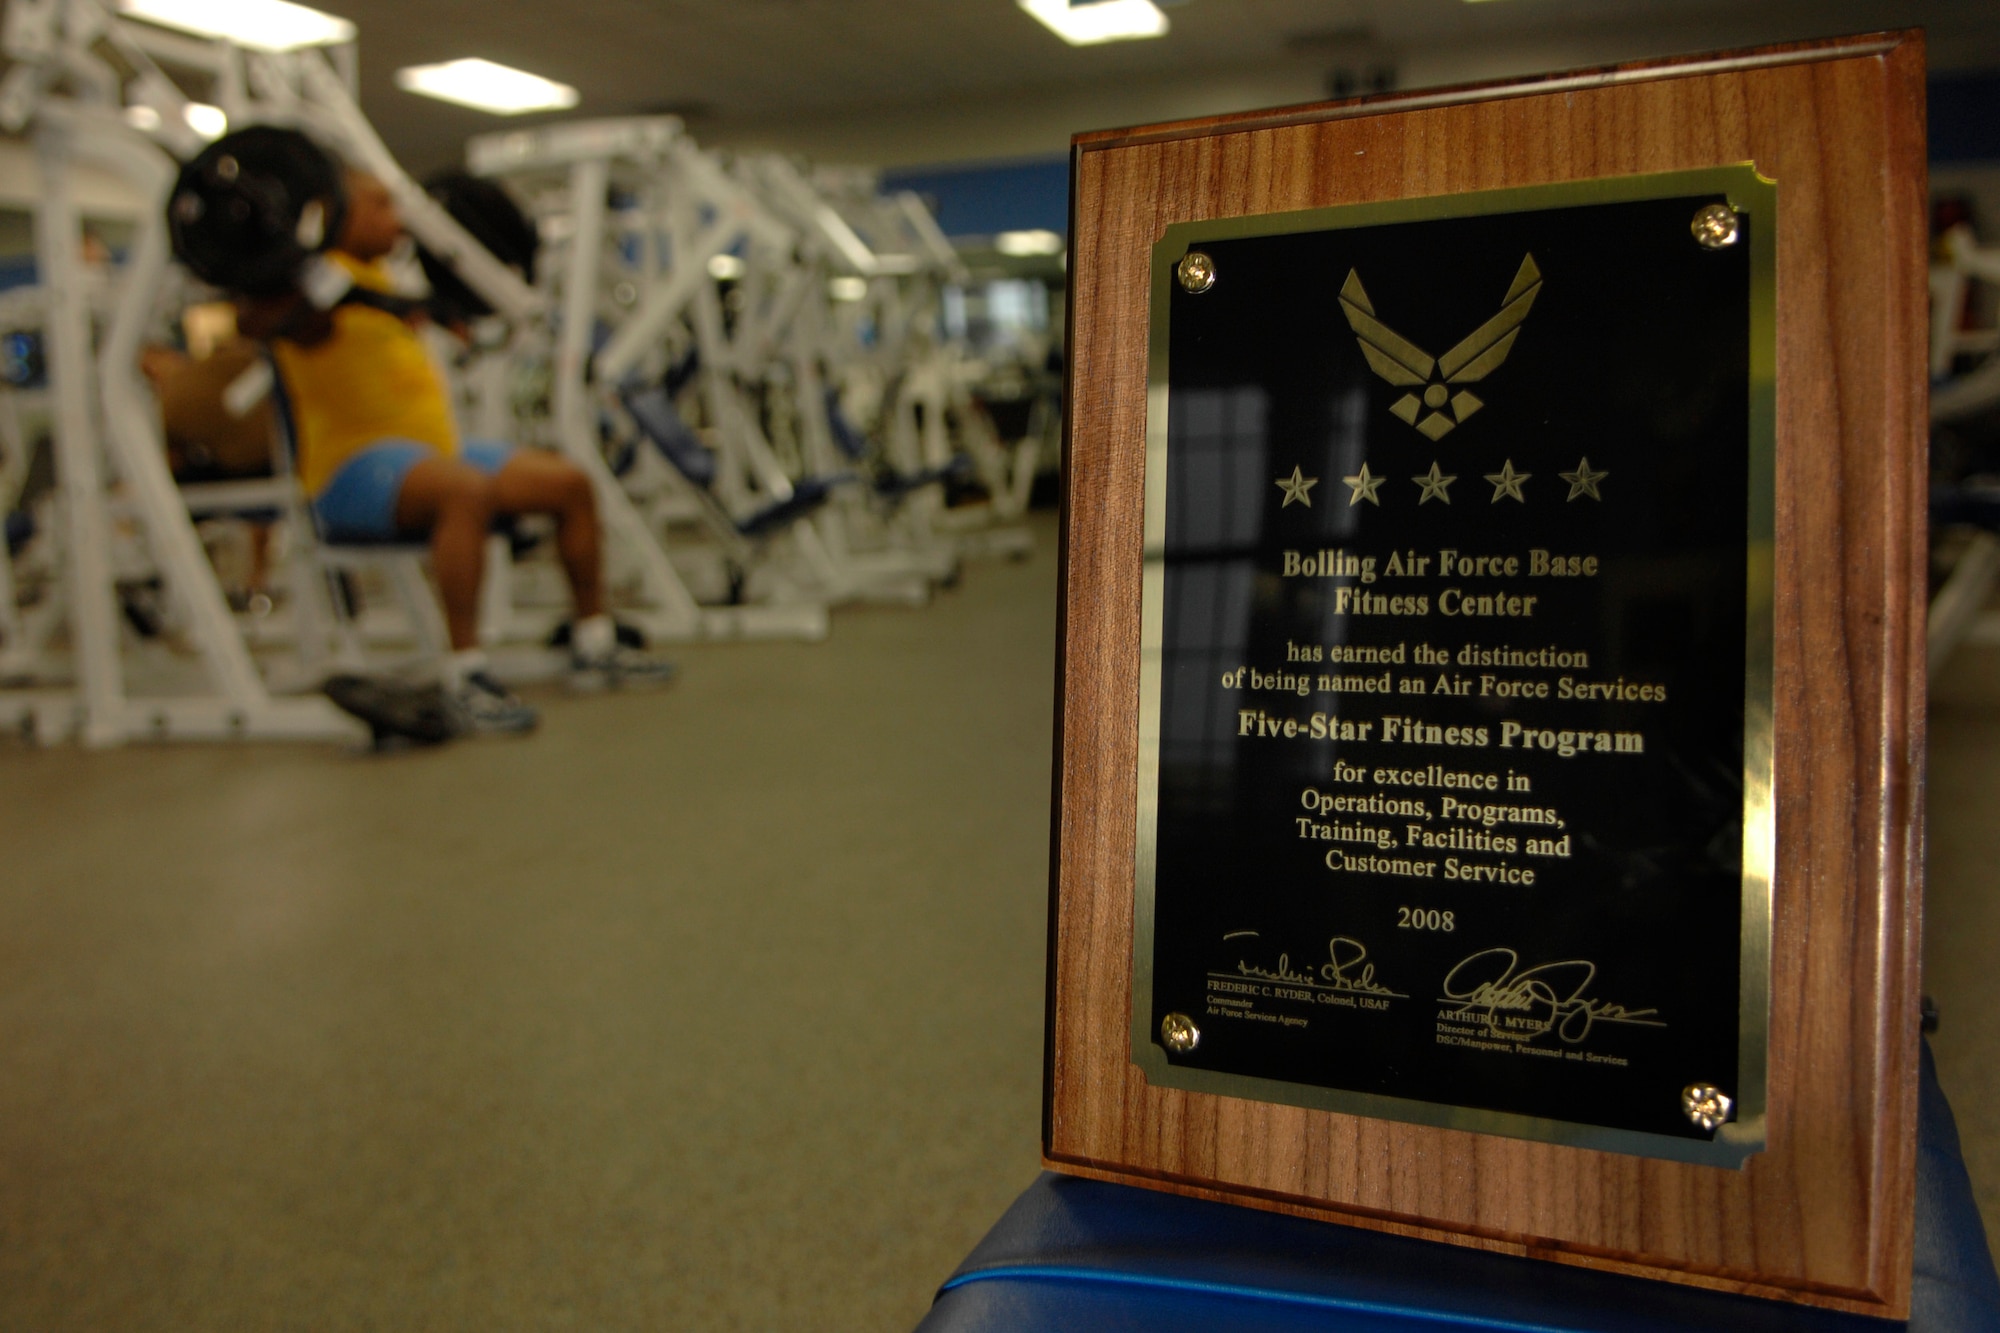 The Bolling Air Force Base Fitness Center received a five-star rating among all Air Force bases worldwide Dec. 2. Bolling’s fitness center was one of 46 bases that received the five-star rating, by receiving a 100 percent on an inspection check list. (U.S. Air Force photo by Senior Airman Tim Chacon)(Released)